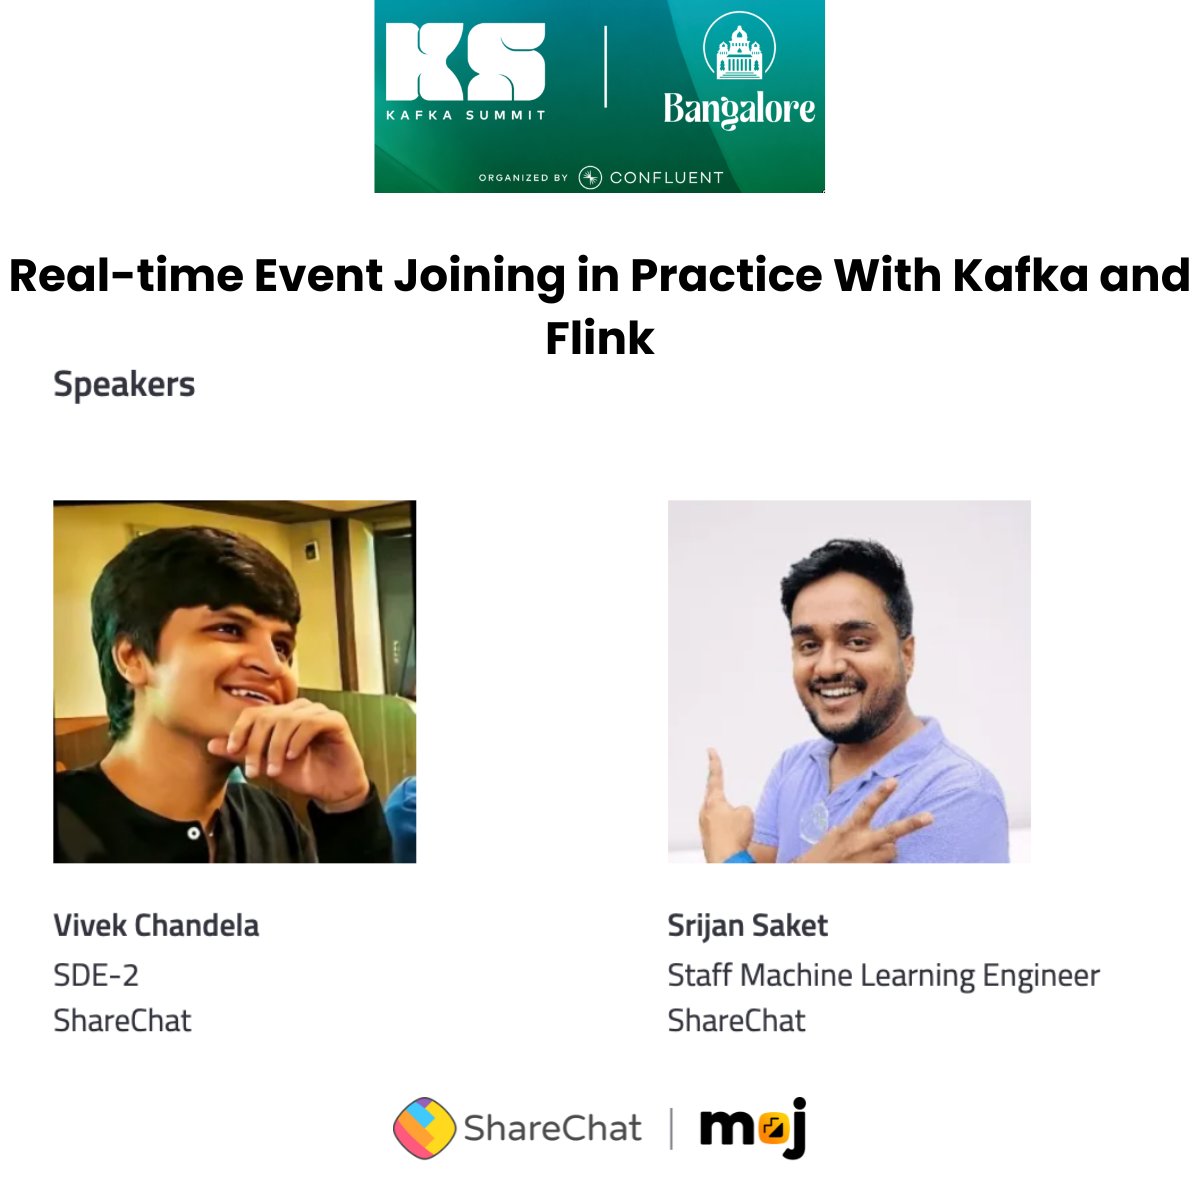 We are excited to announce that Srijan Saket and Vivek Chandela, two of our stellar AI engineering team members, will present at the Kafka Bangalore conference! 

Get to know more about their session - bit.ly/49Kgd37

#KafkaSummit #AI #ML @confluentinc